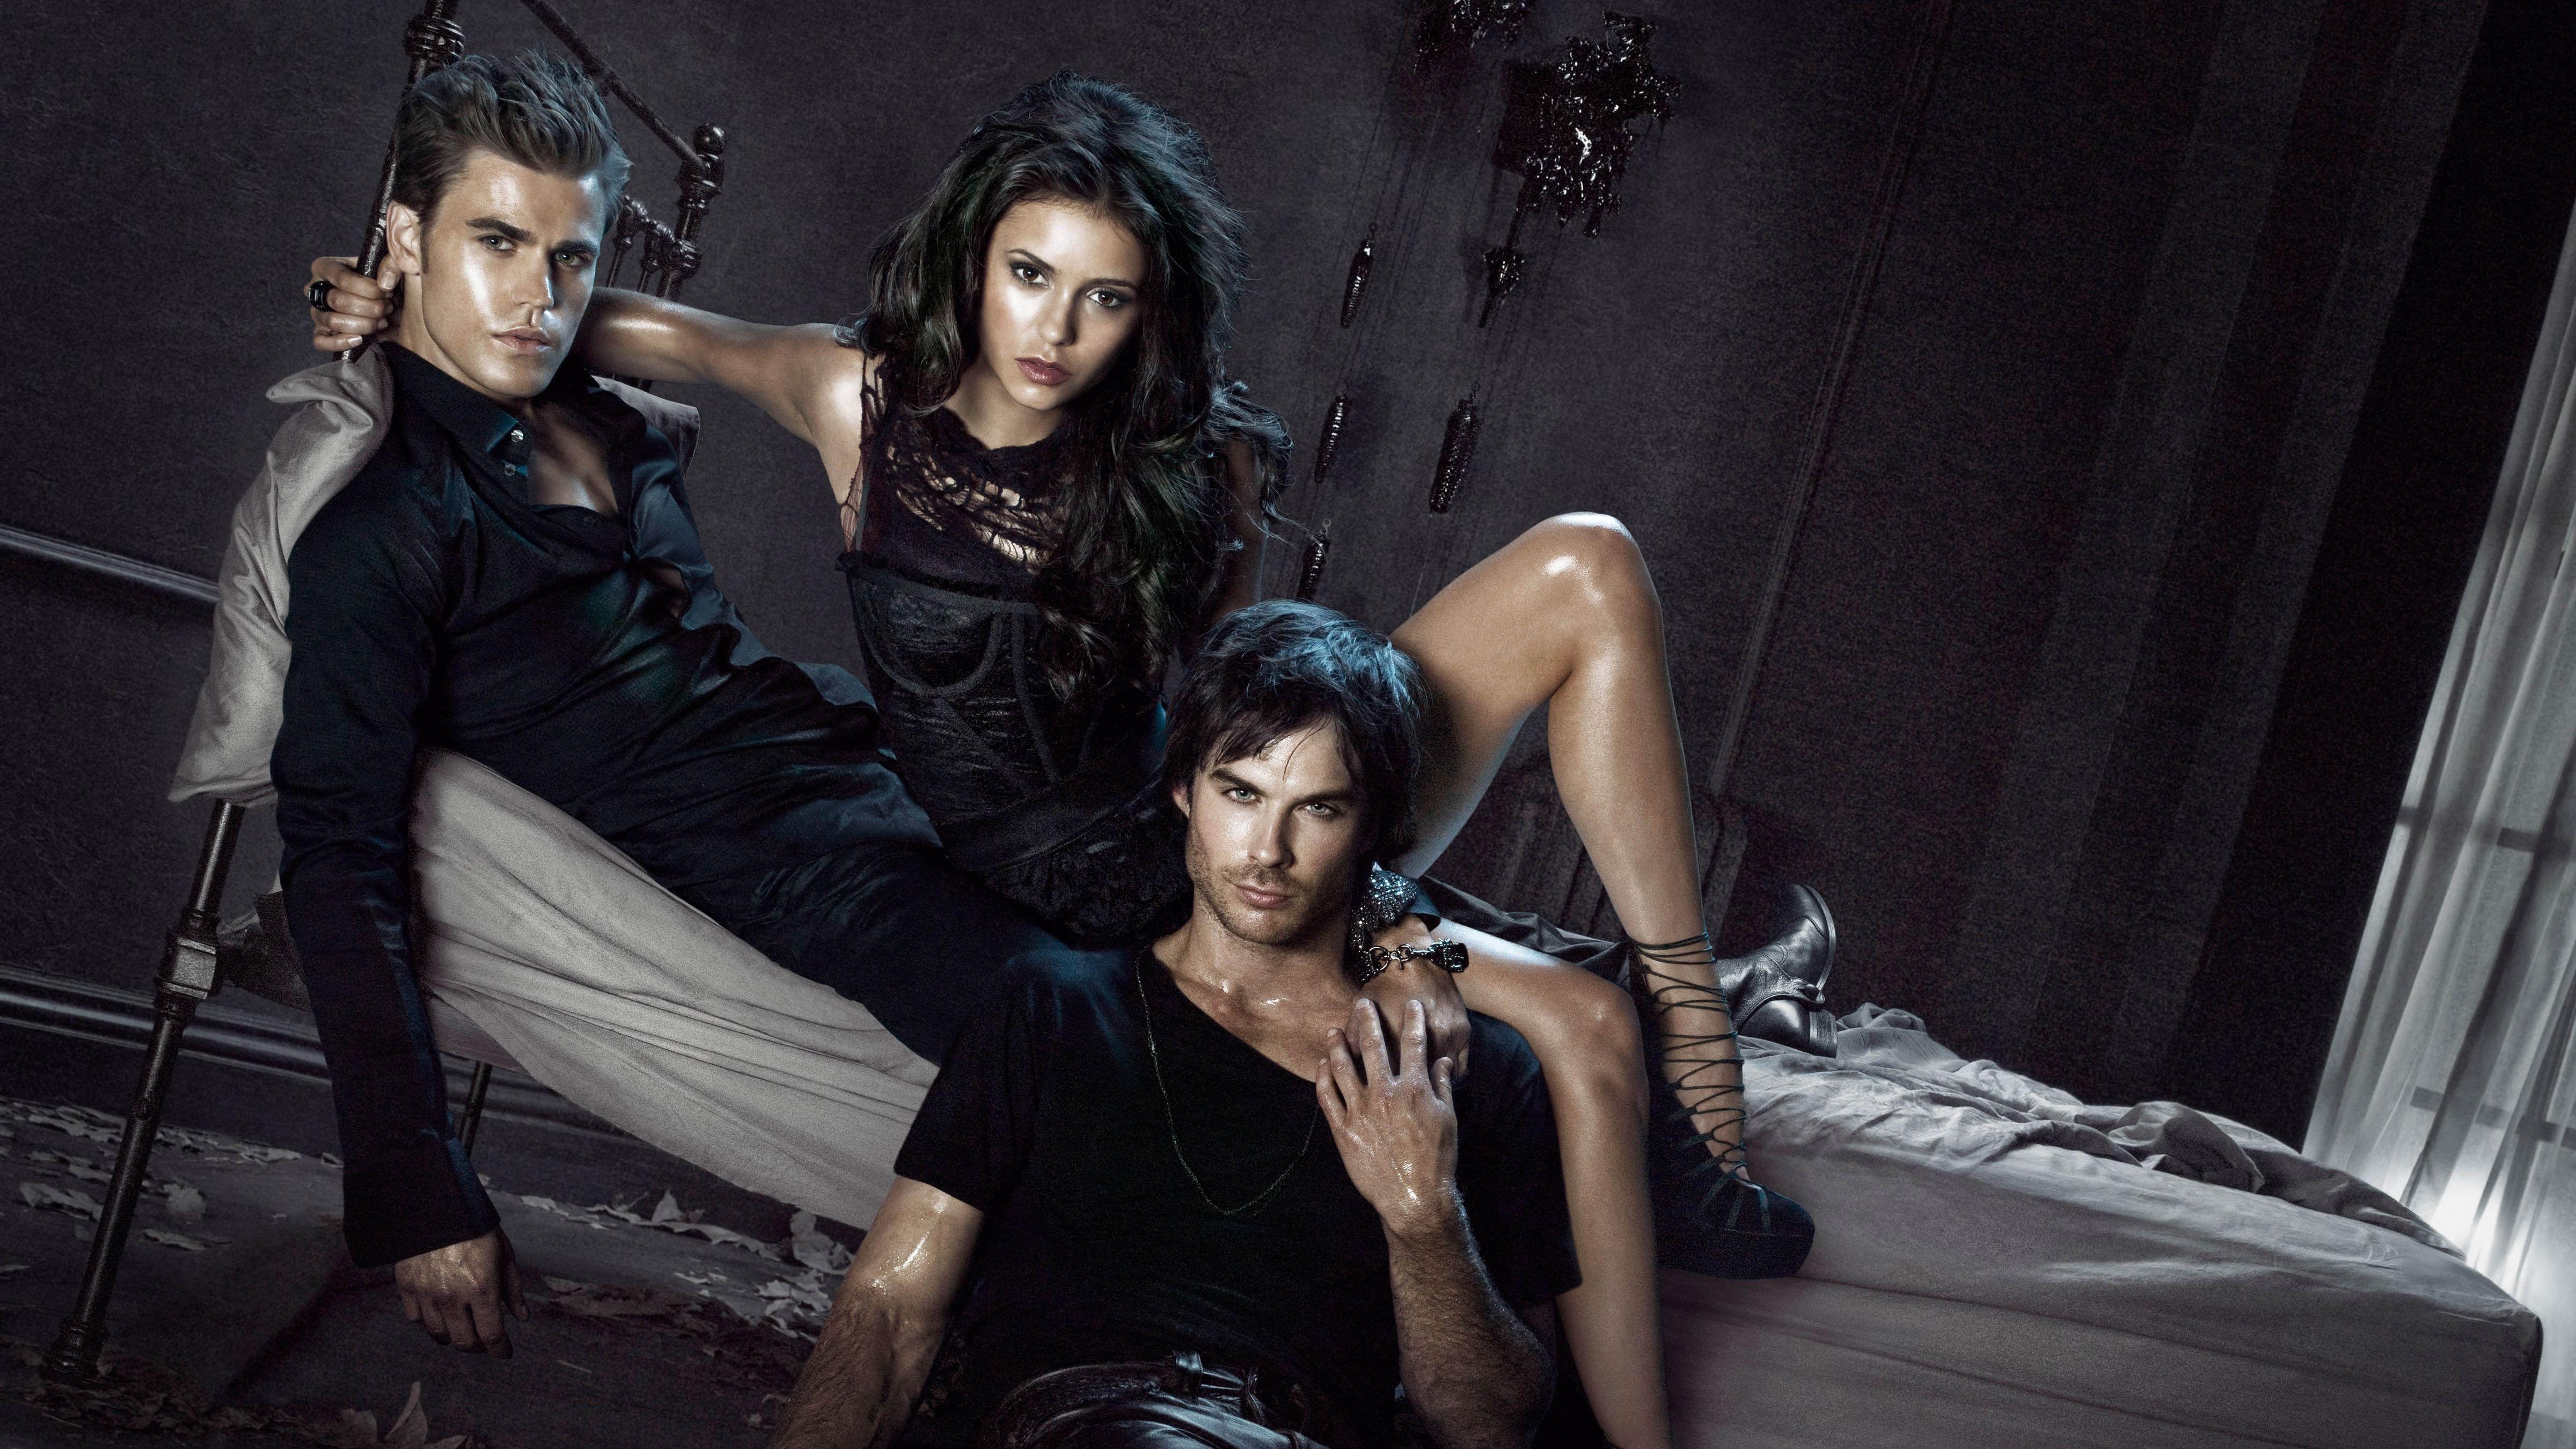 The Vampire Diaries Wallpapers Top Free The Vampire Diaries Backgrounds Wallpaperaccess 0012